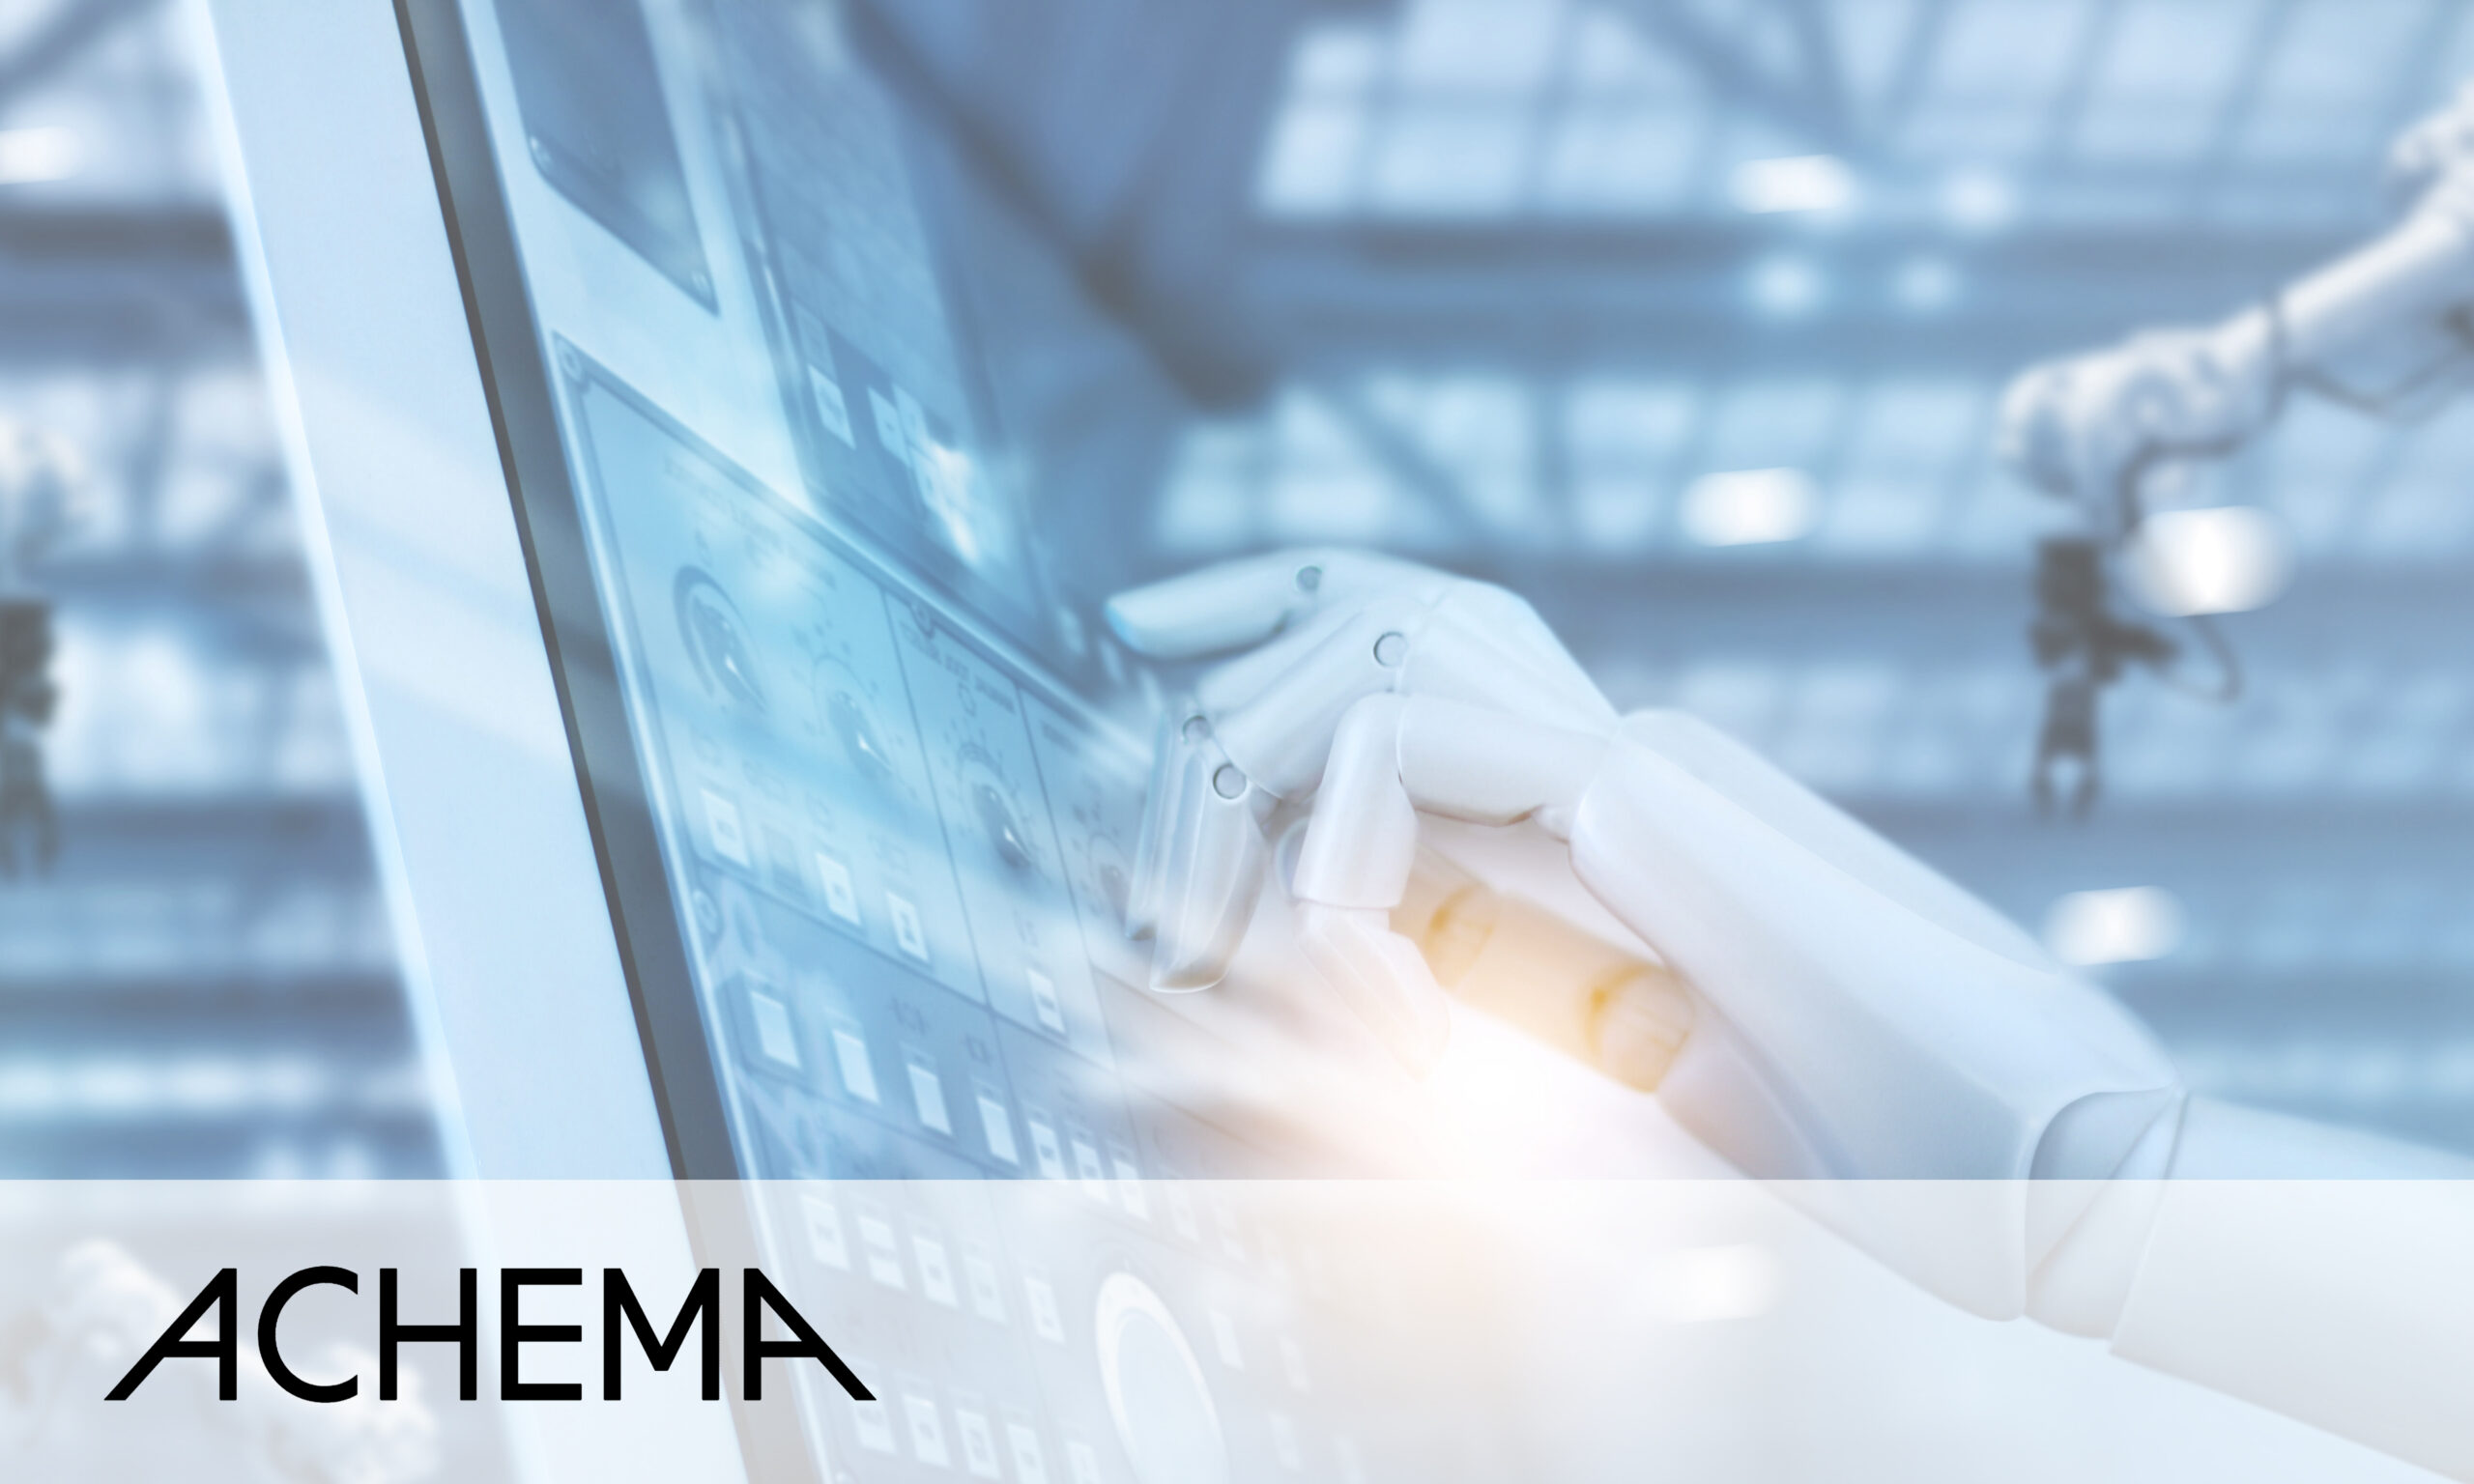 ACHEMA – The World Forum for The Process Industry